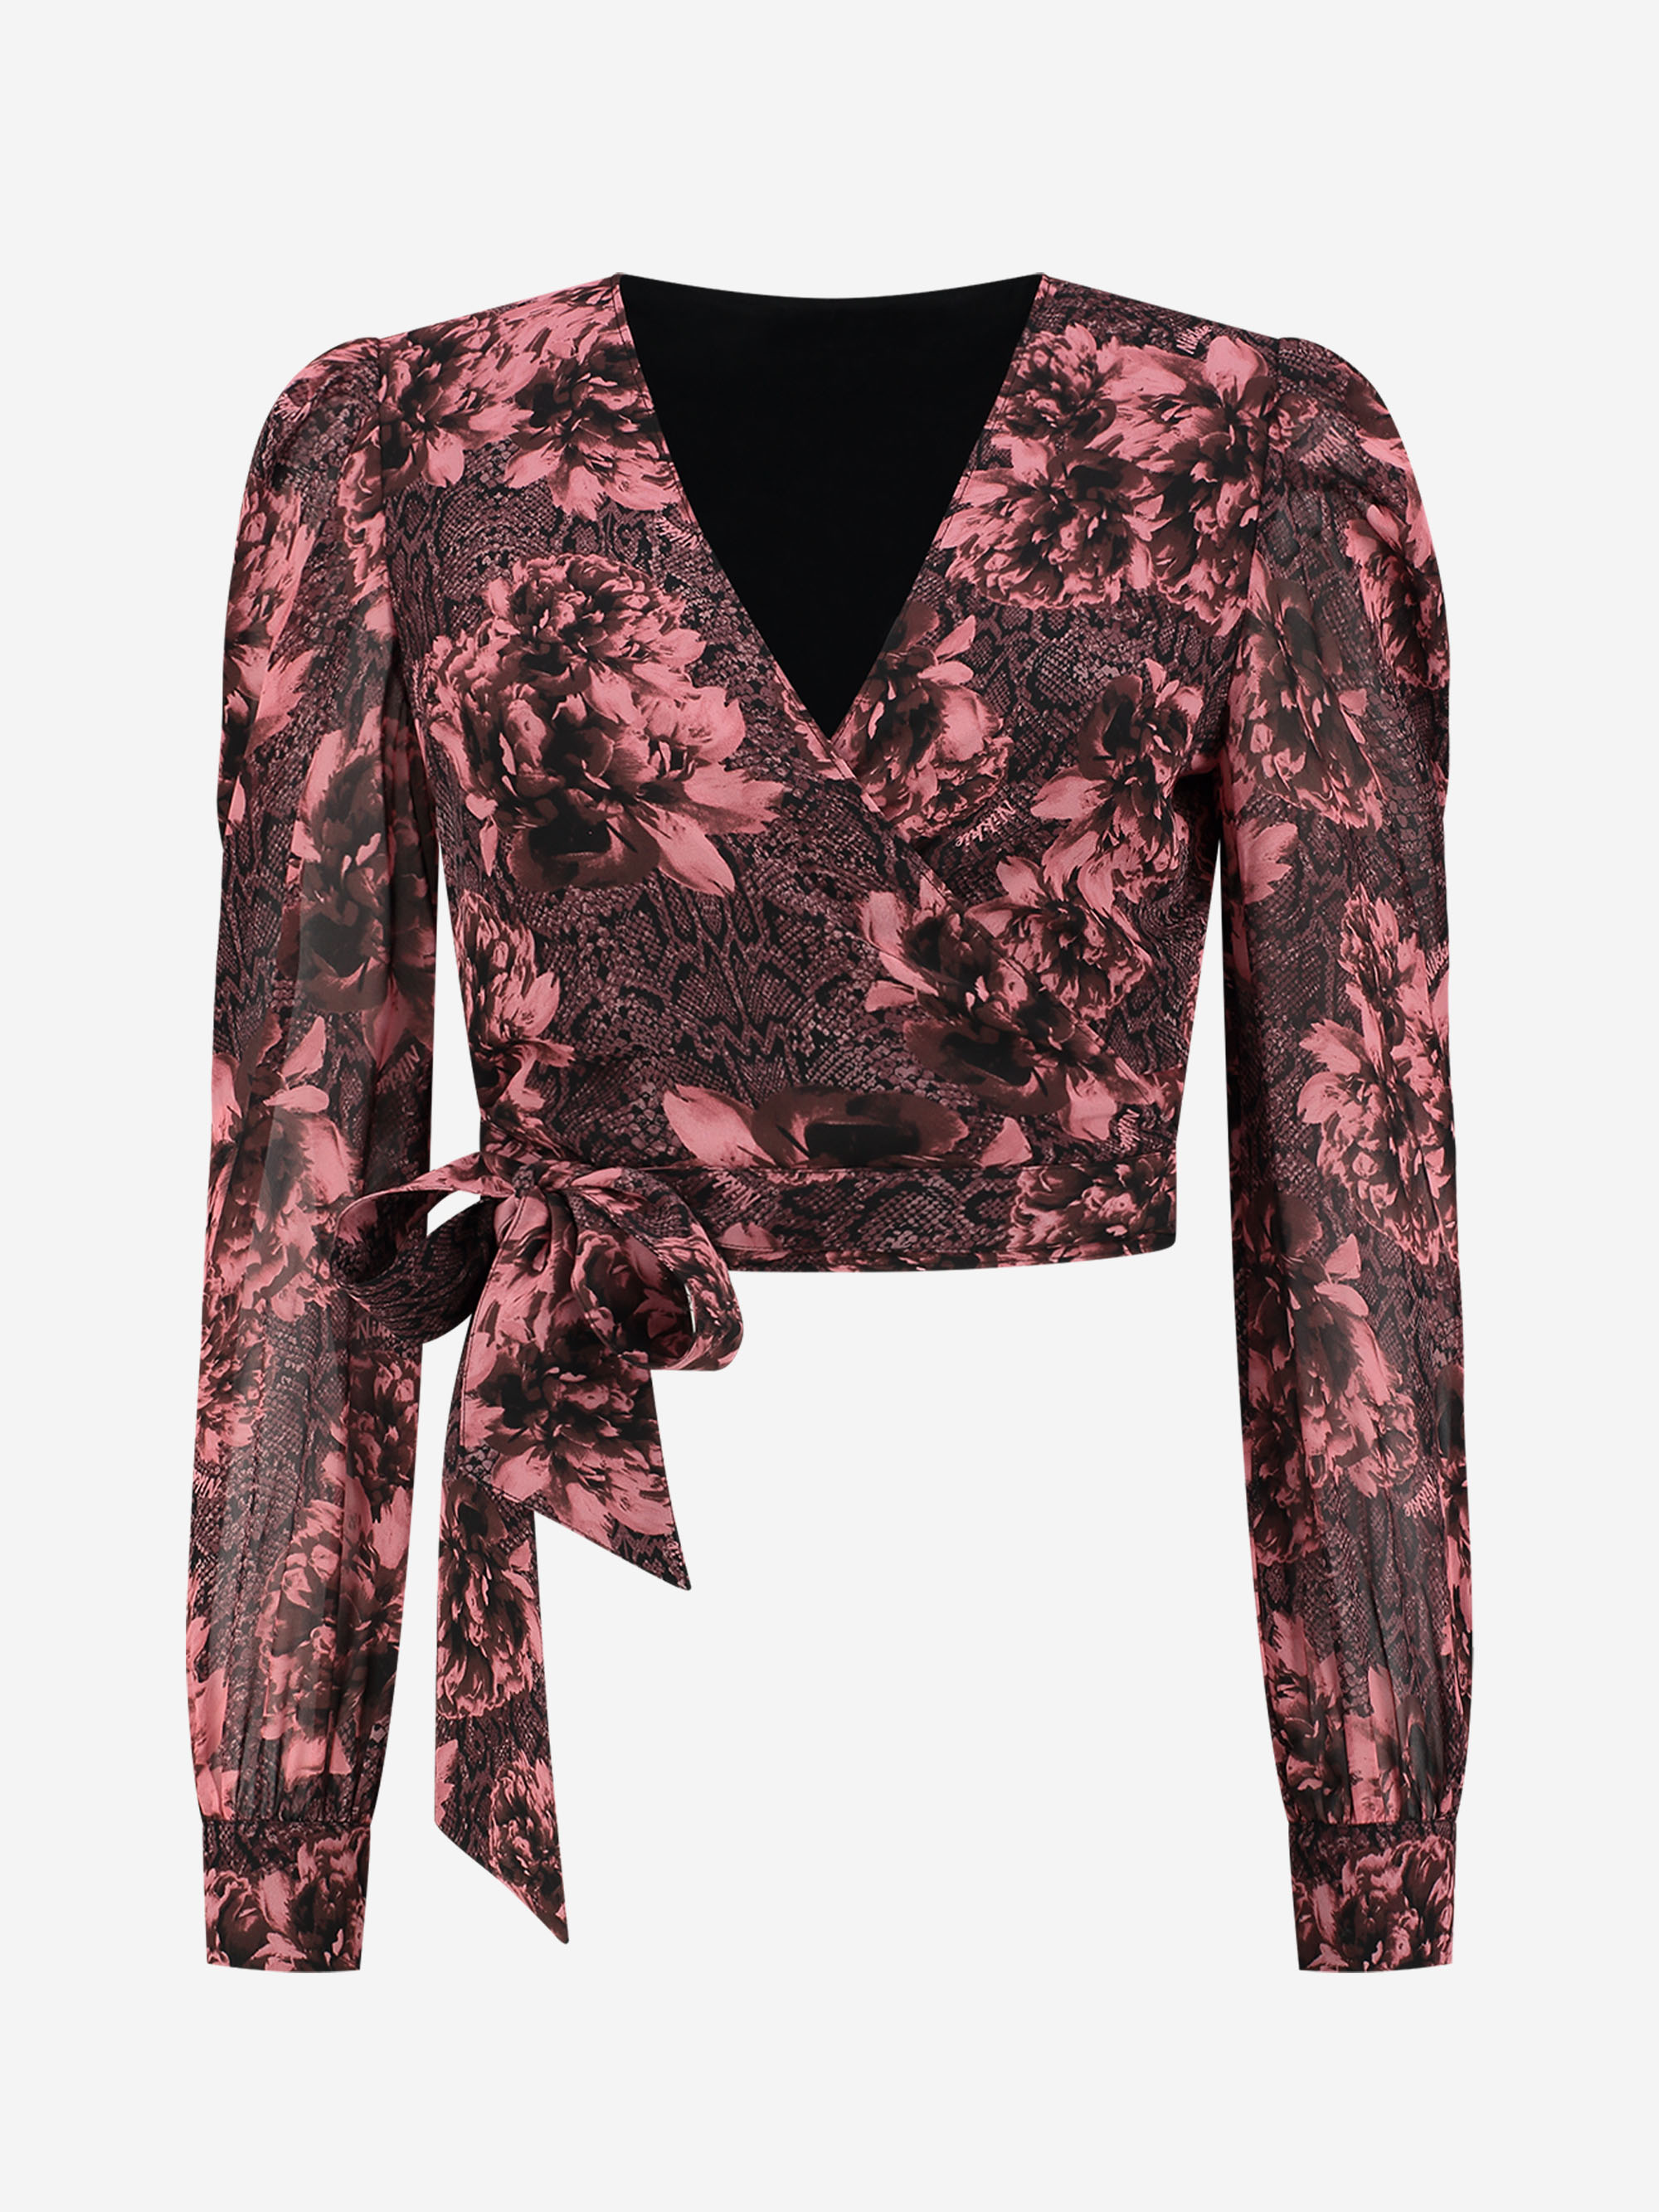 Wrap top with rose snake print